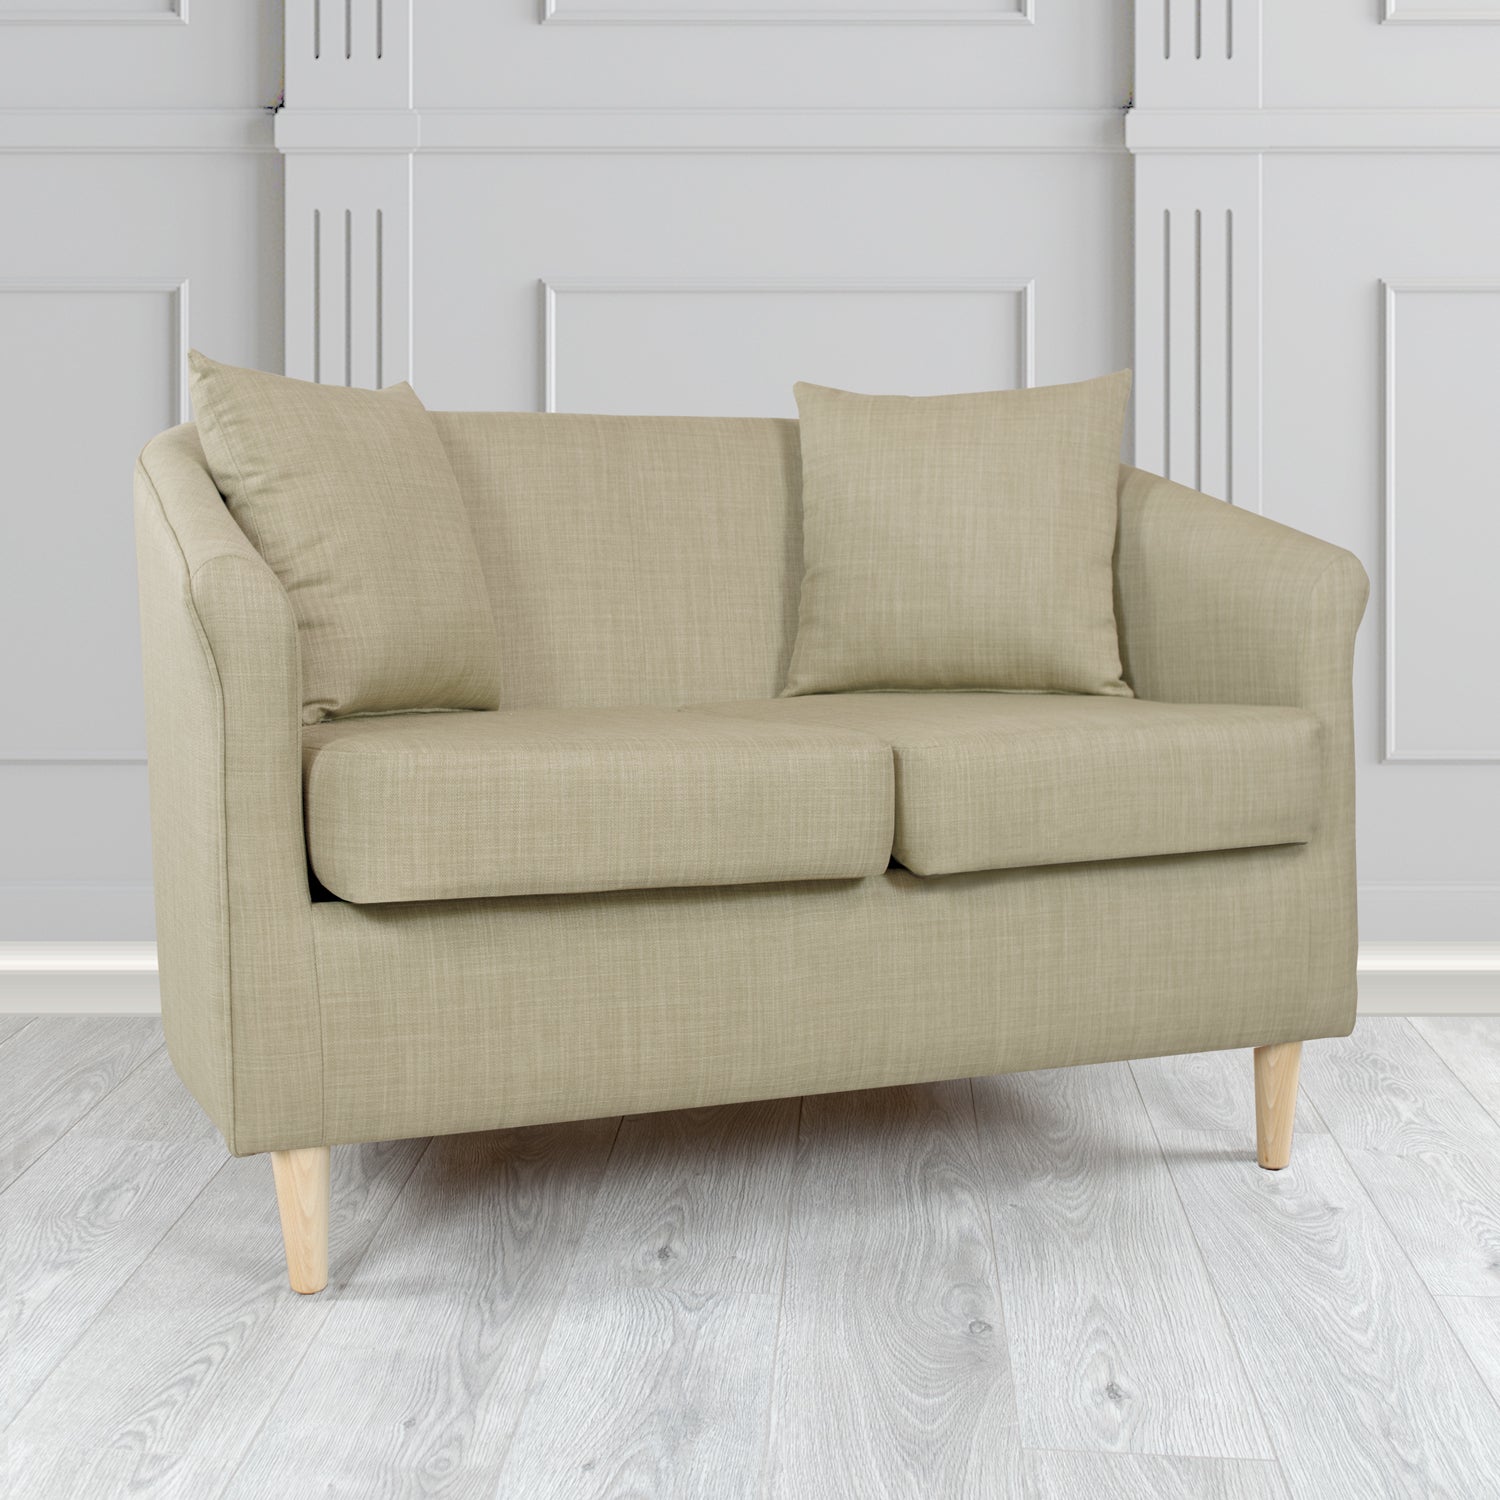 St Tropez Charles Fudge Plain Linen Fabric 2 Seater Tub Sofa with Scatter Cushions - The Tub Chair Shop